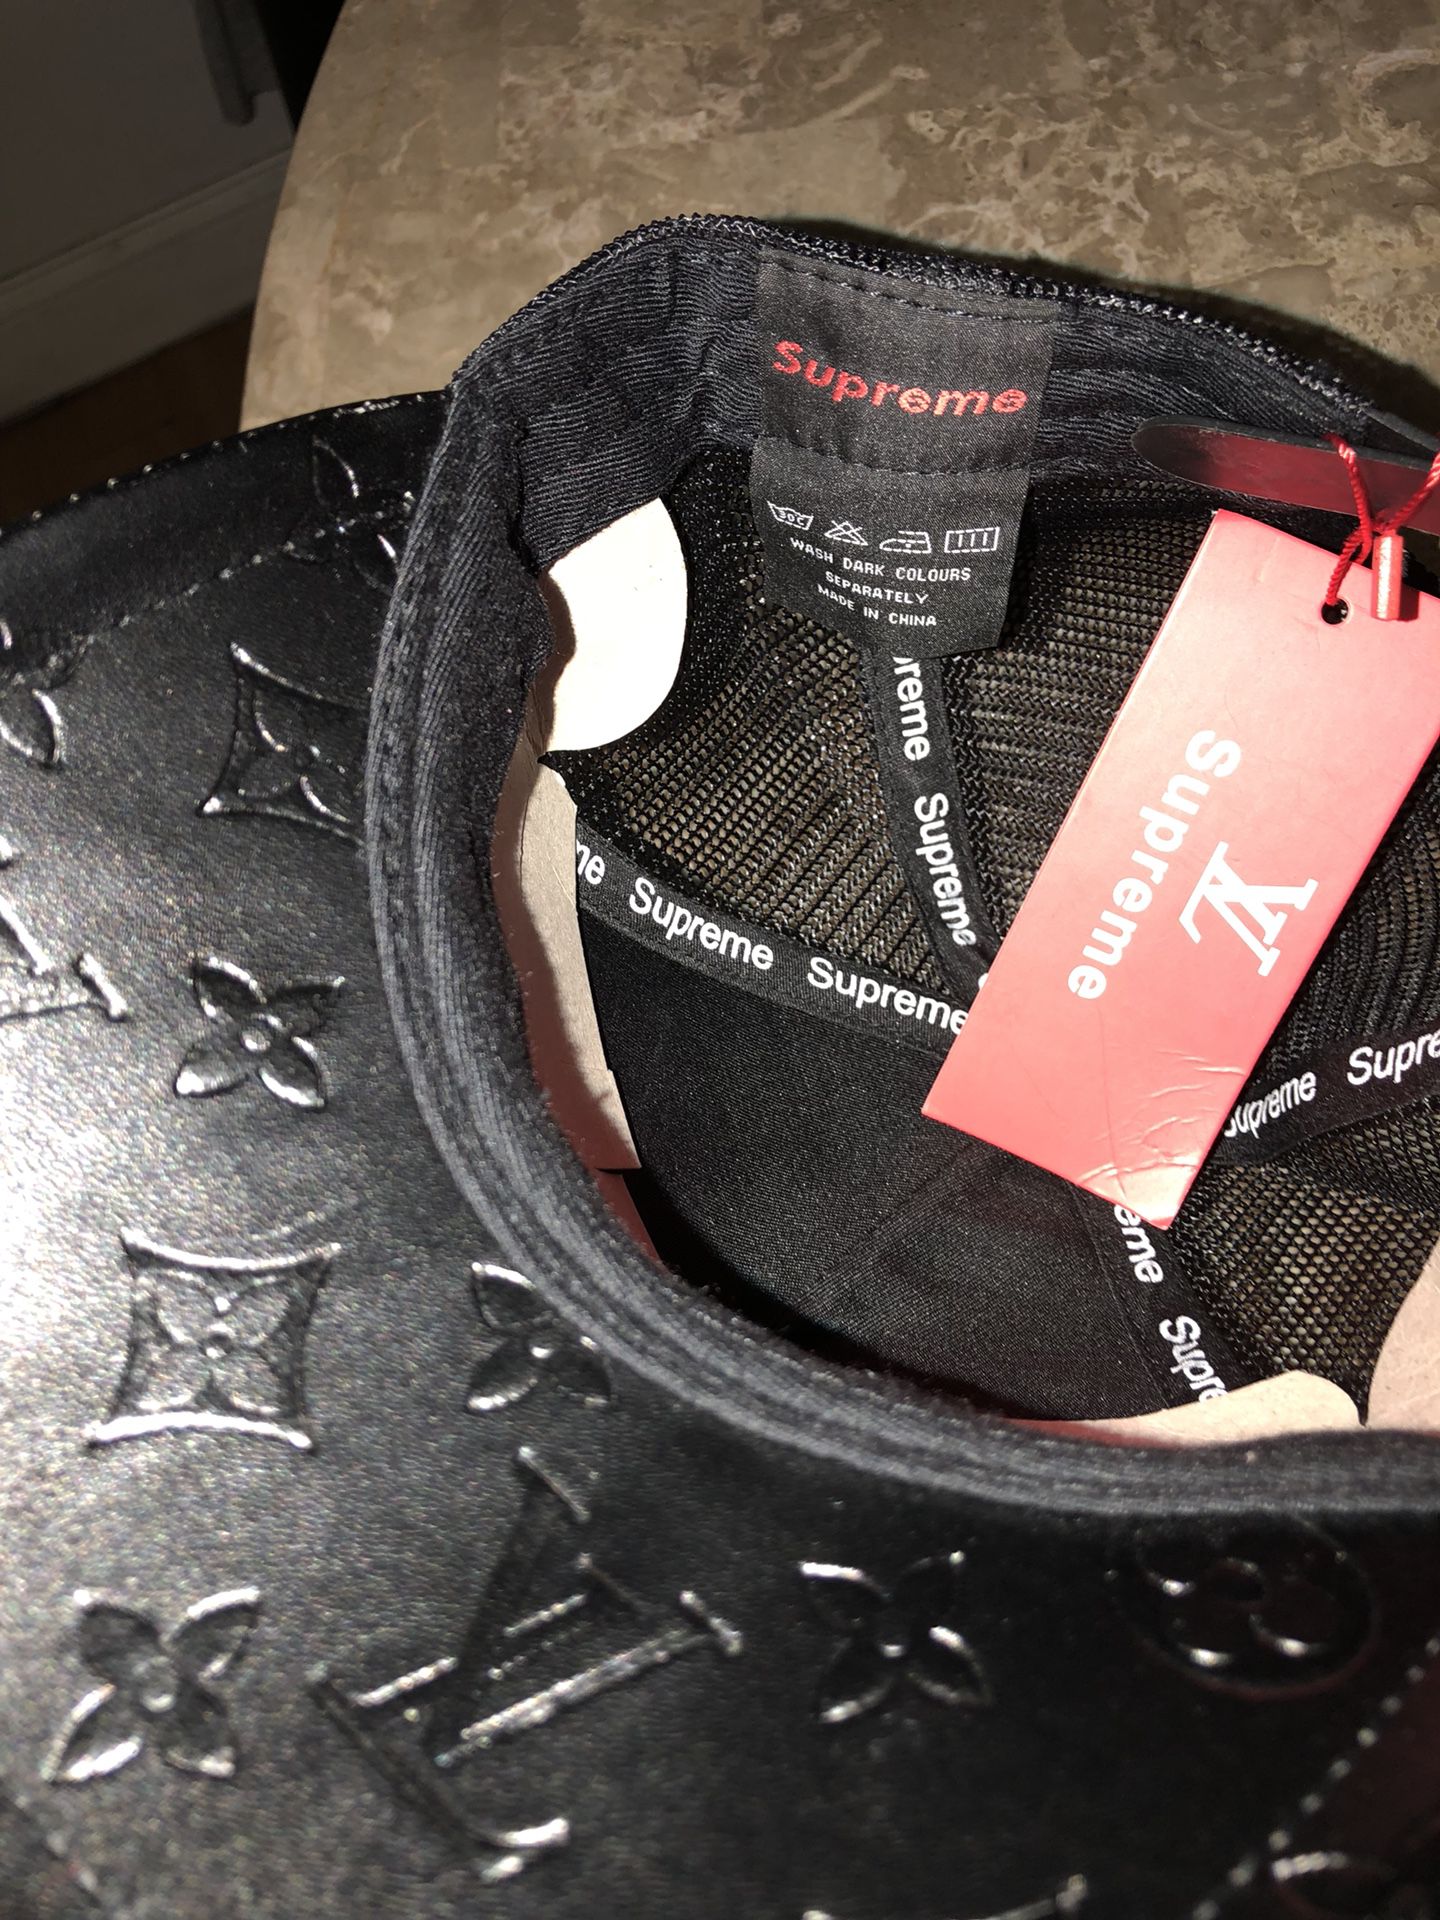 SUPREME LOUIS VUITTON HATS for Sale in Los Angeles, CA - OfferUp